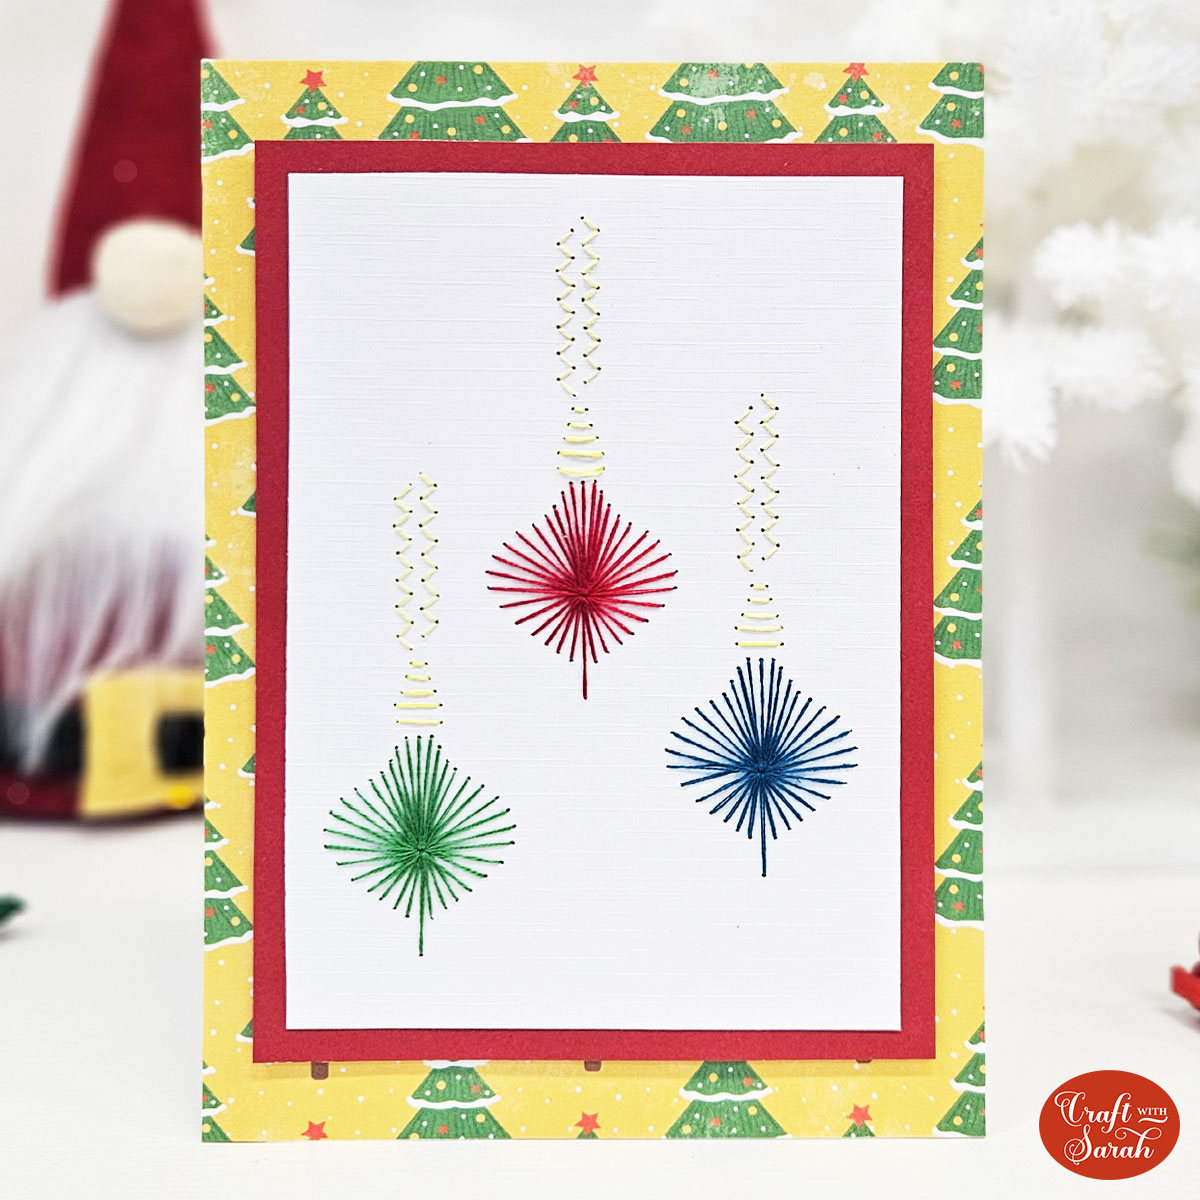 Card Stitching Patterns: Paper Embroidery on Cards! - Craft with Sarah